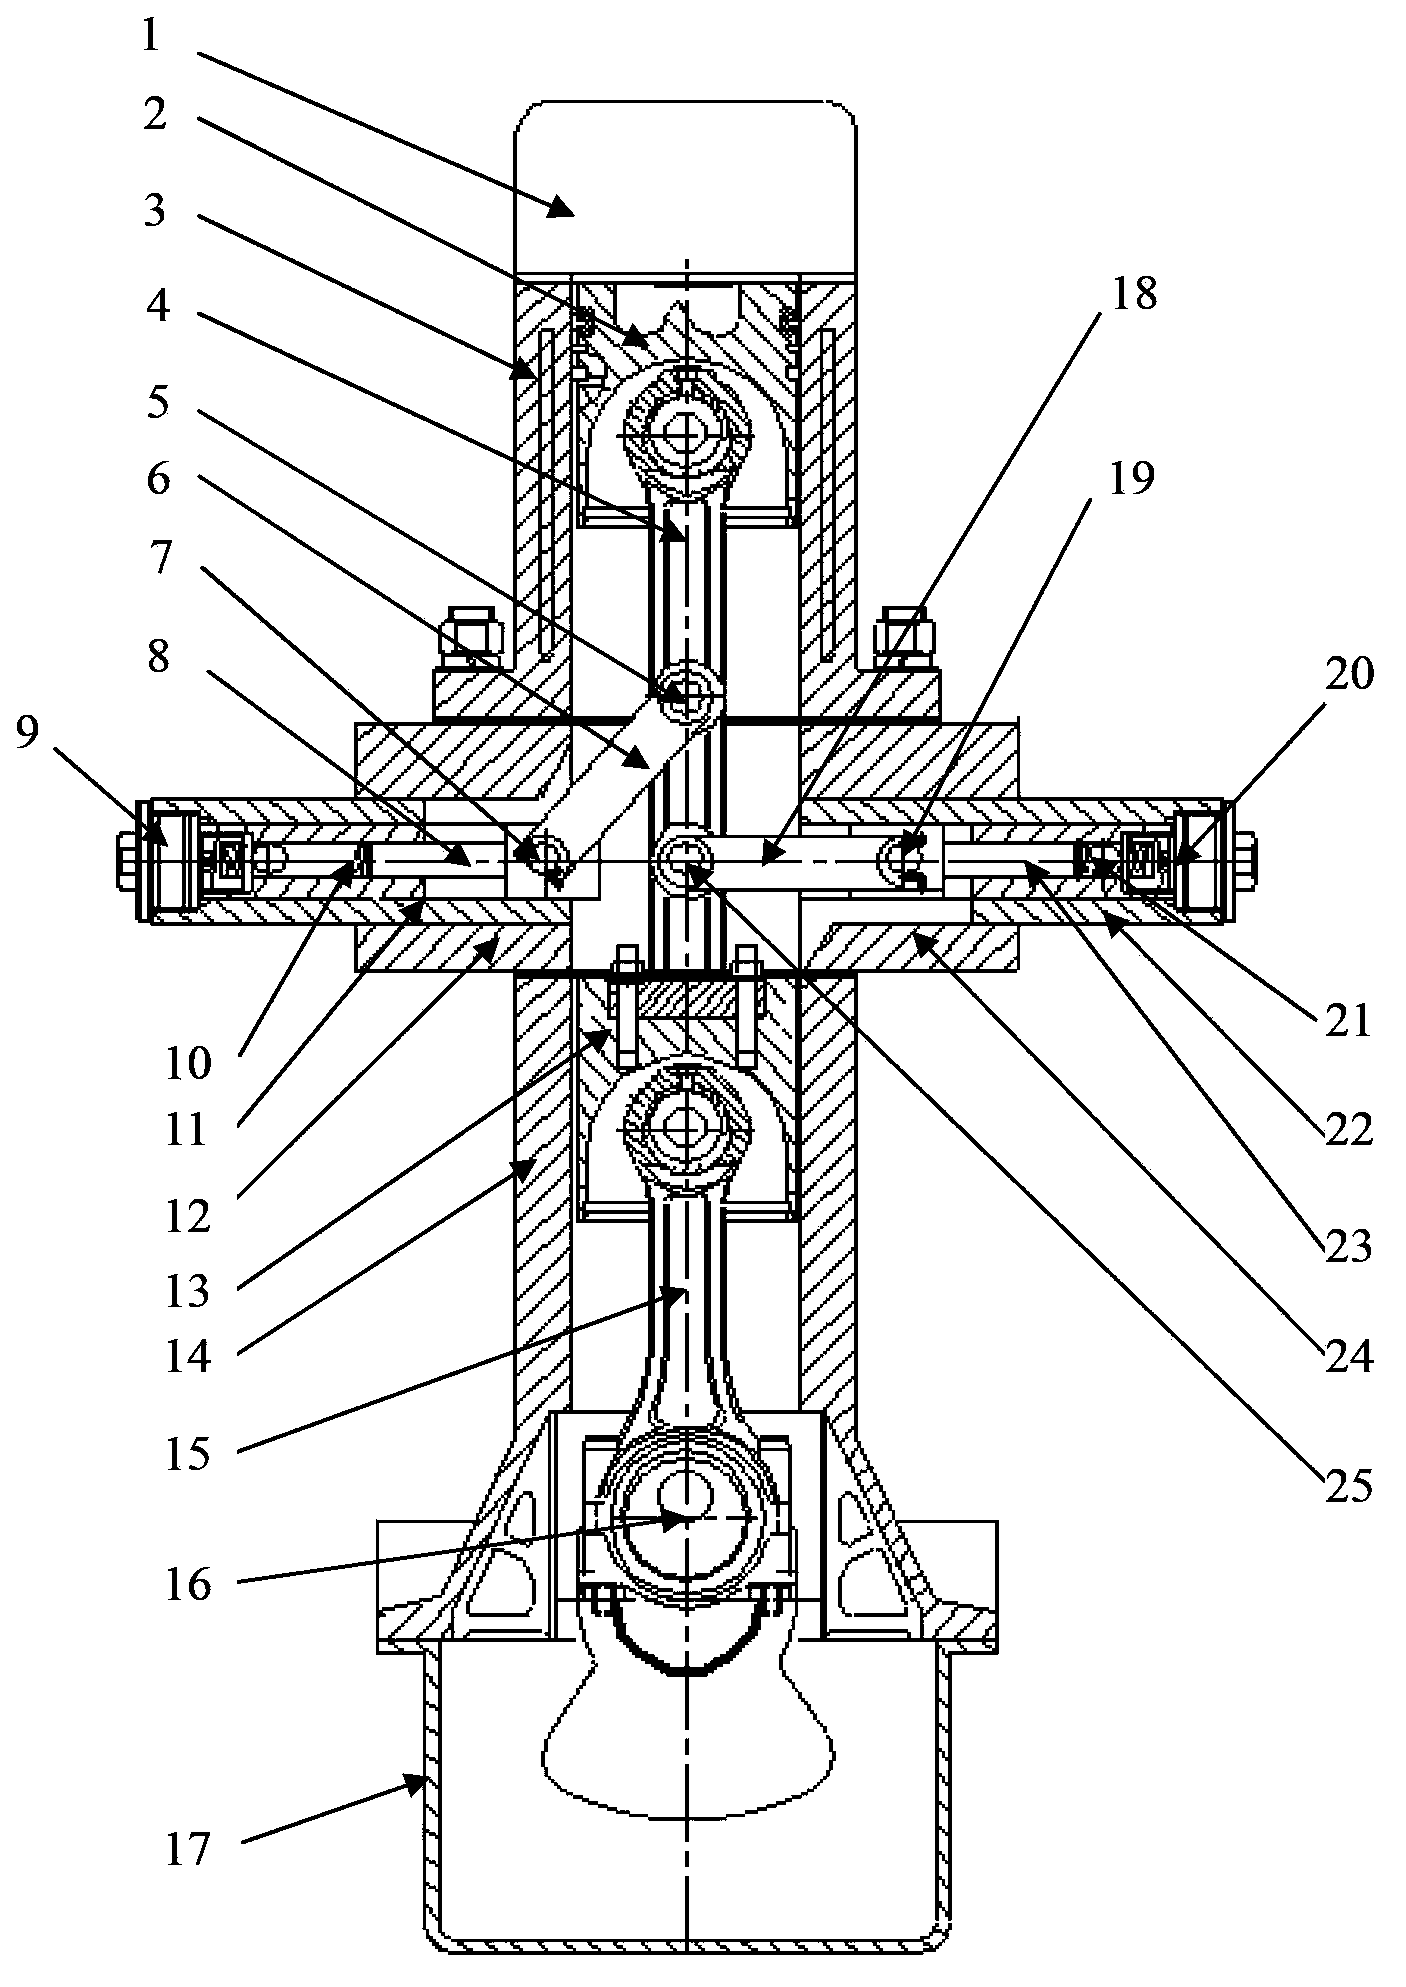 Engine hydraulic energy and power conversion device